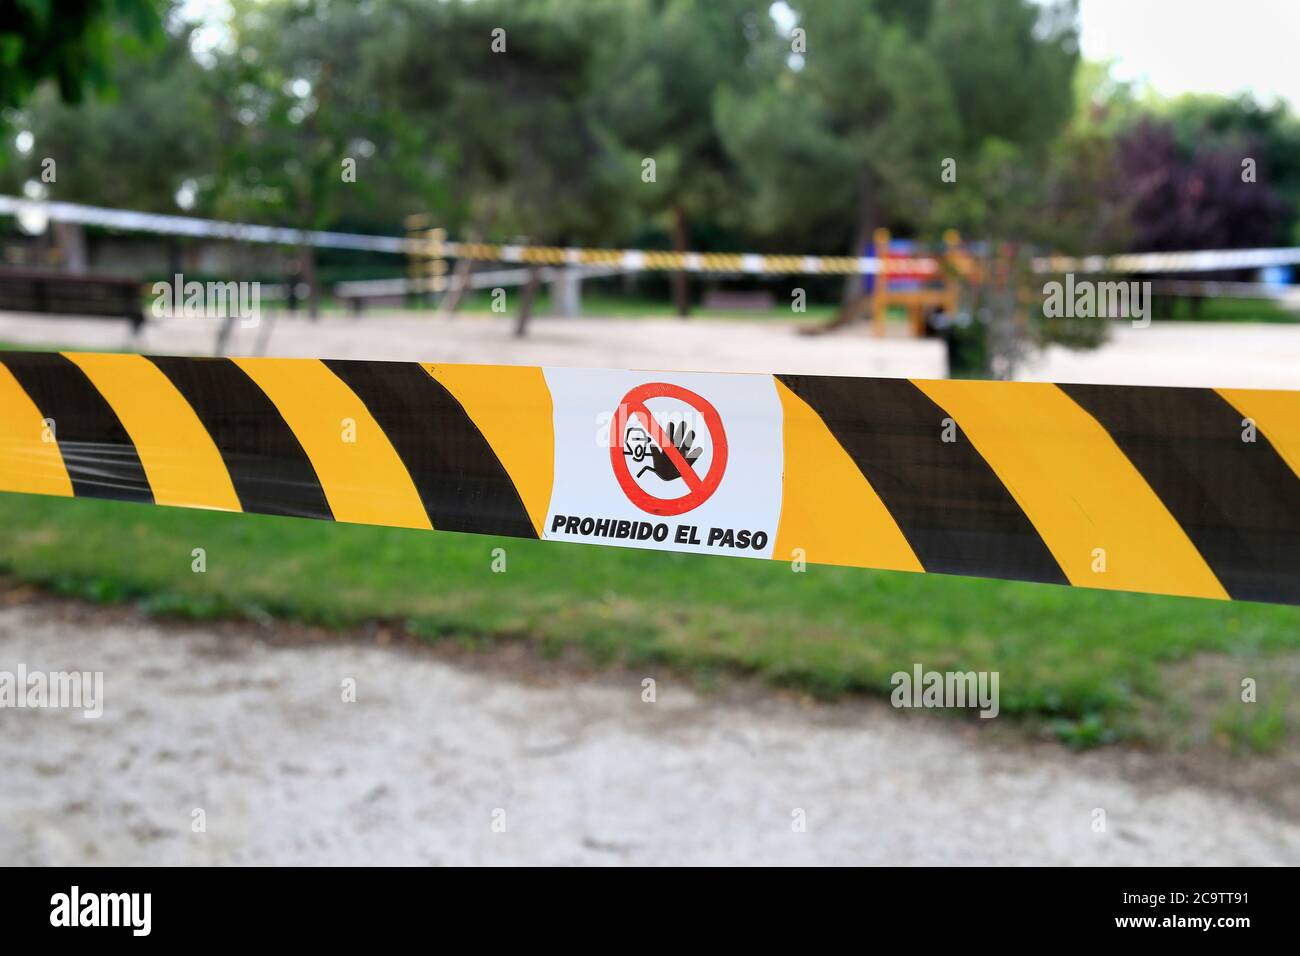 Madrid, Spain - June 5, 2020: The parks remain closed during the Covid-19 pandemic. Text translation: Prohibido el paso - Forbidden passage Stock Photo